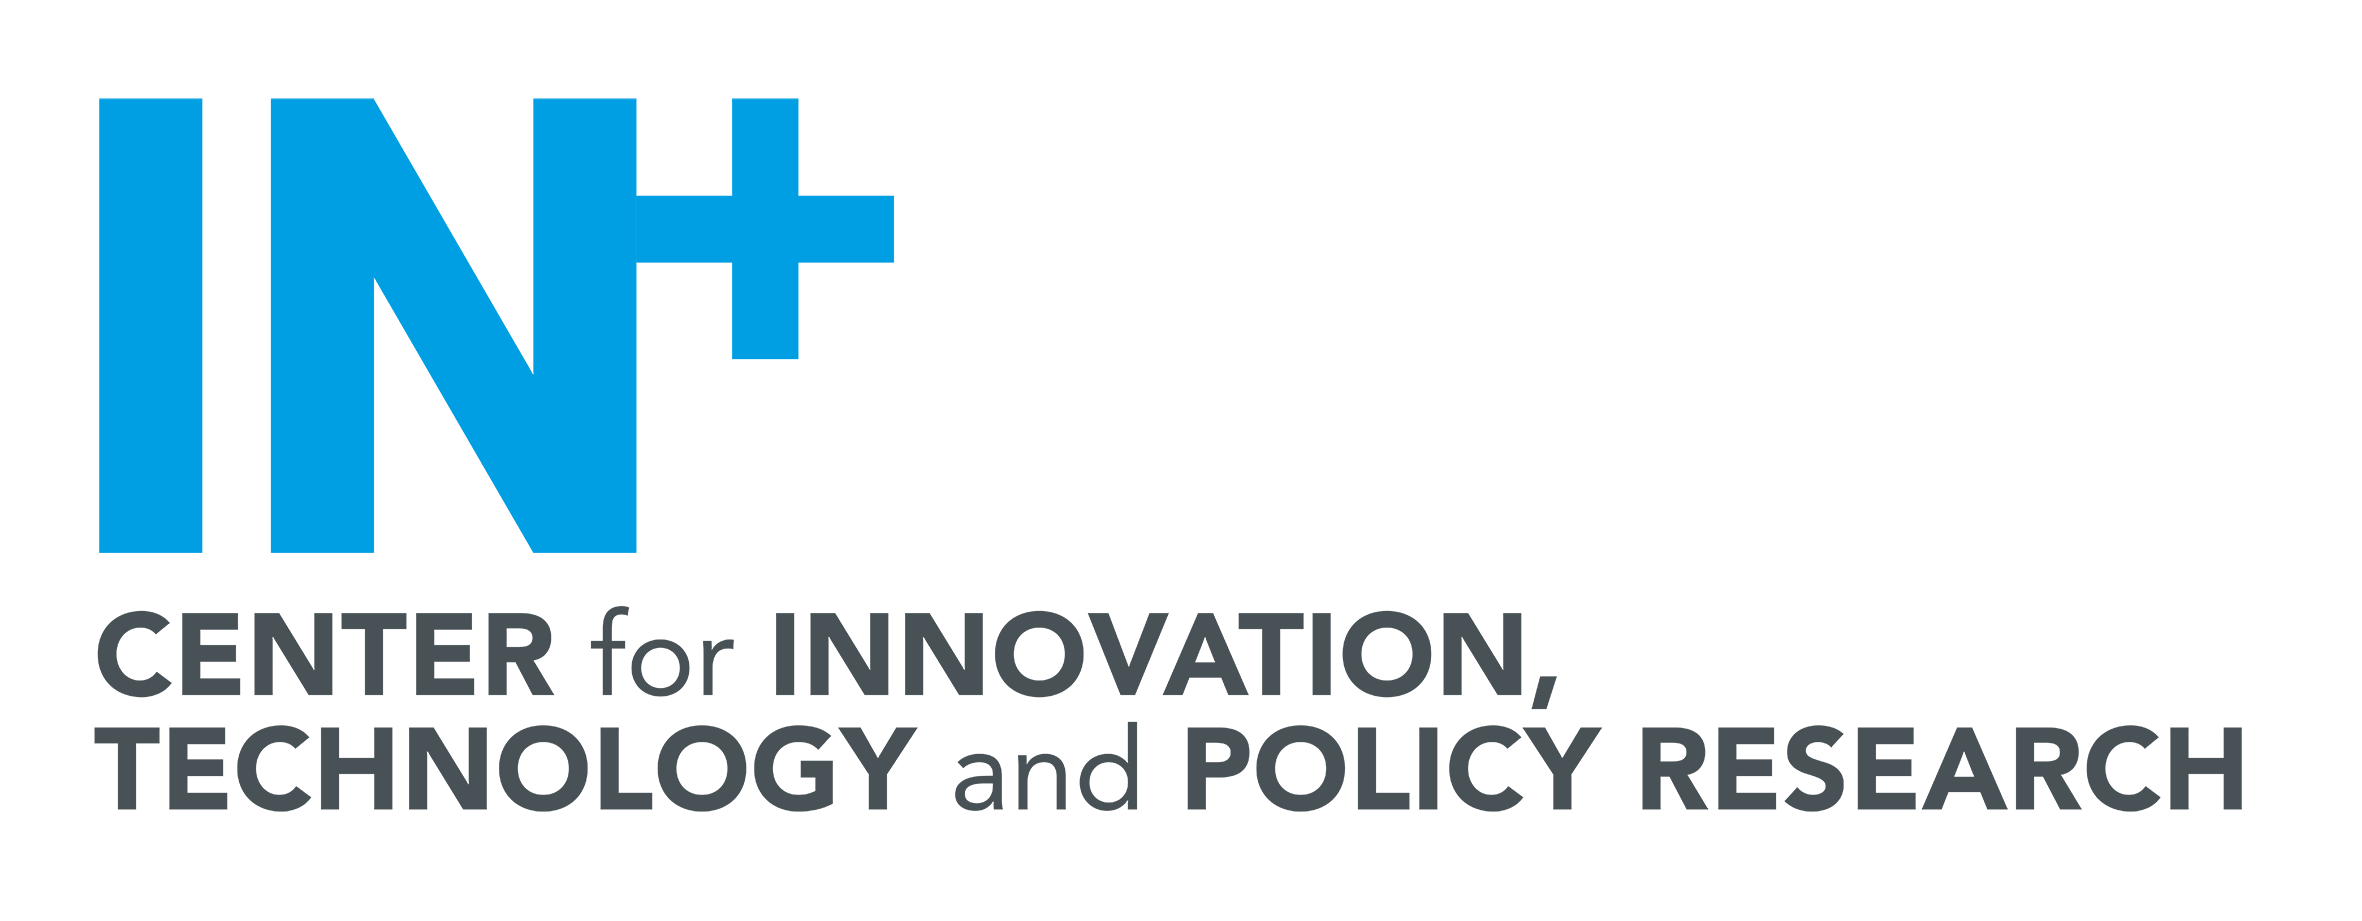 IN+ Center for Innovation, Technology and Policy Research